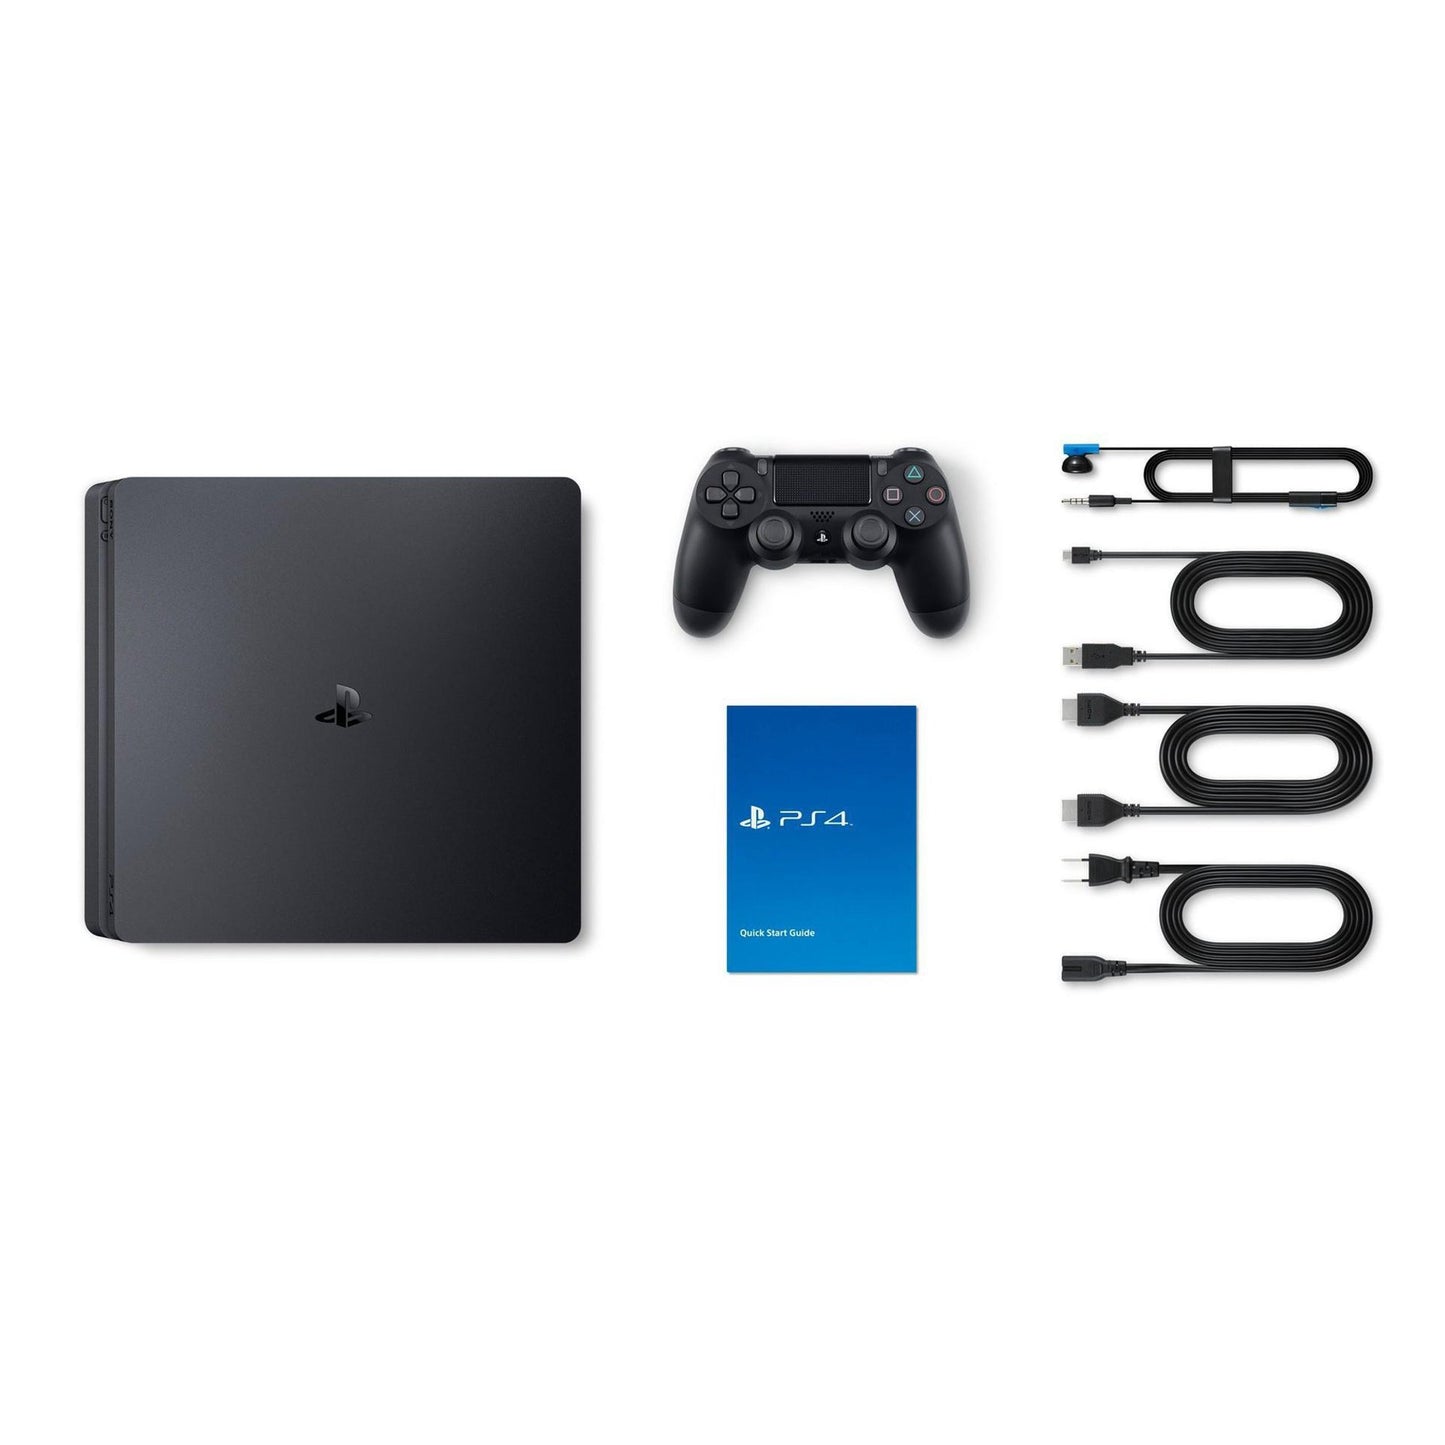 Sony 2215B PlayStation 4 Slim 1TB Gaming Console Black with HDMI Cable (Like New)